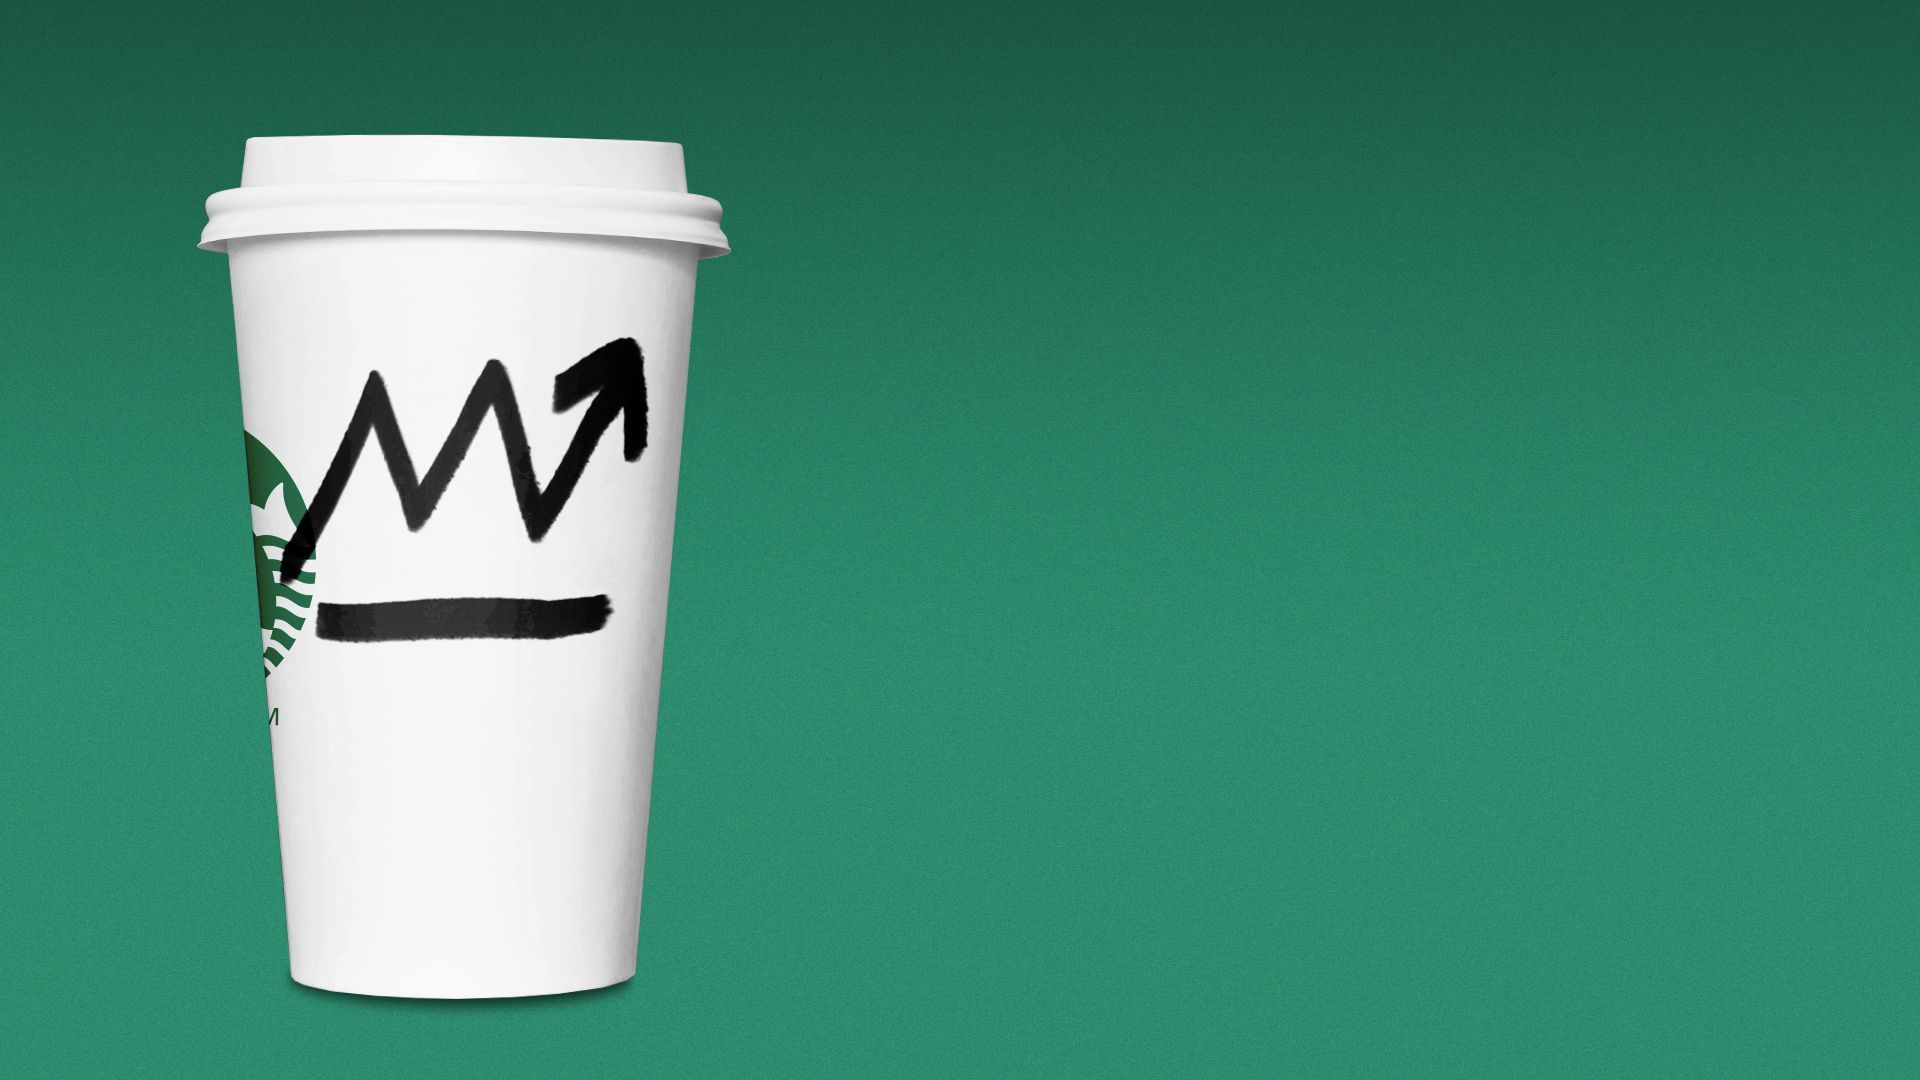 Illustration of a Starbucks coffee cup with a stock trend line drawn on the side with marker